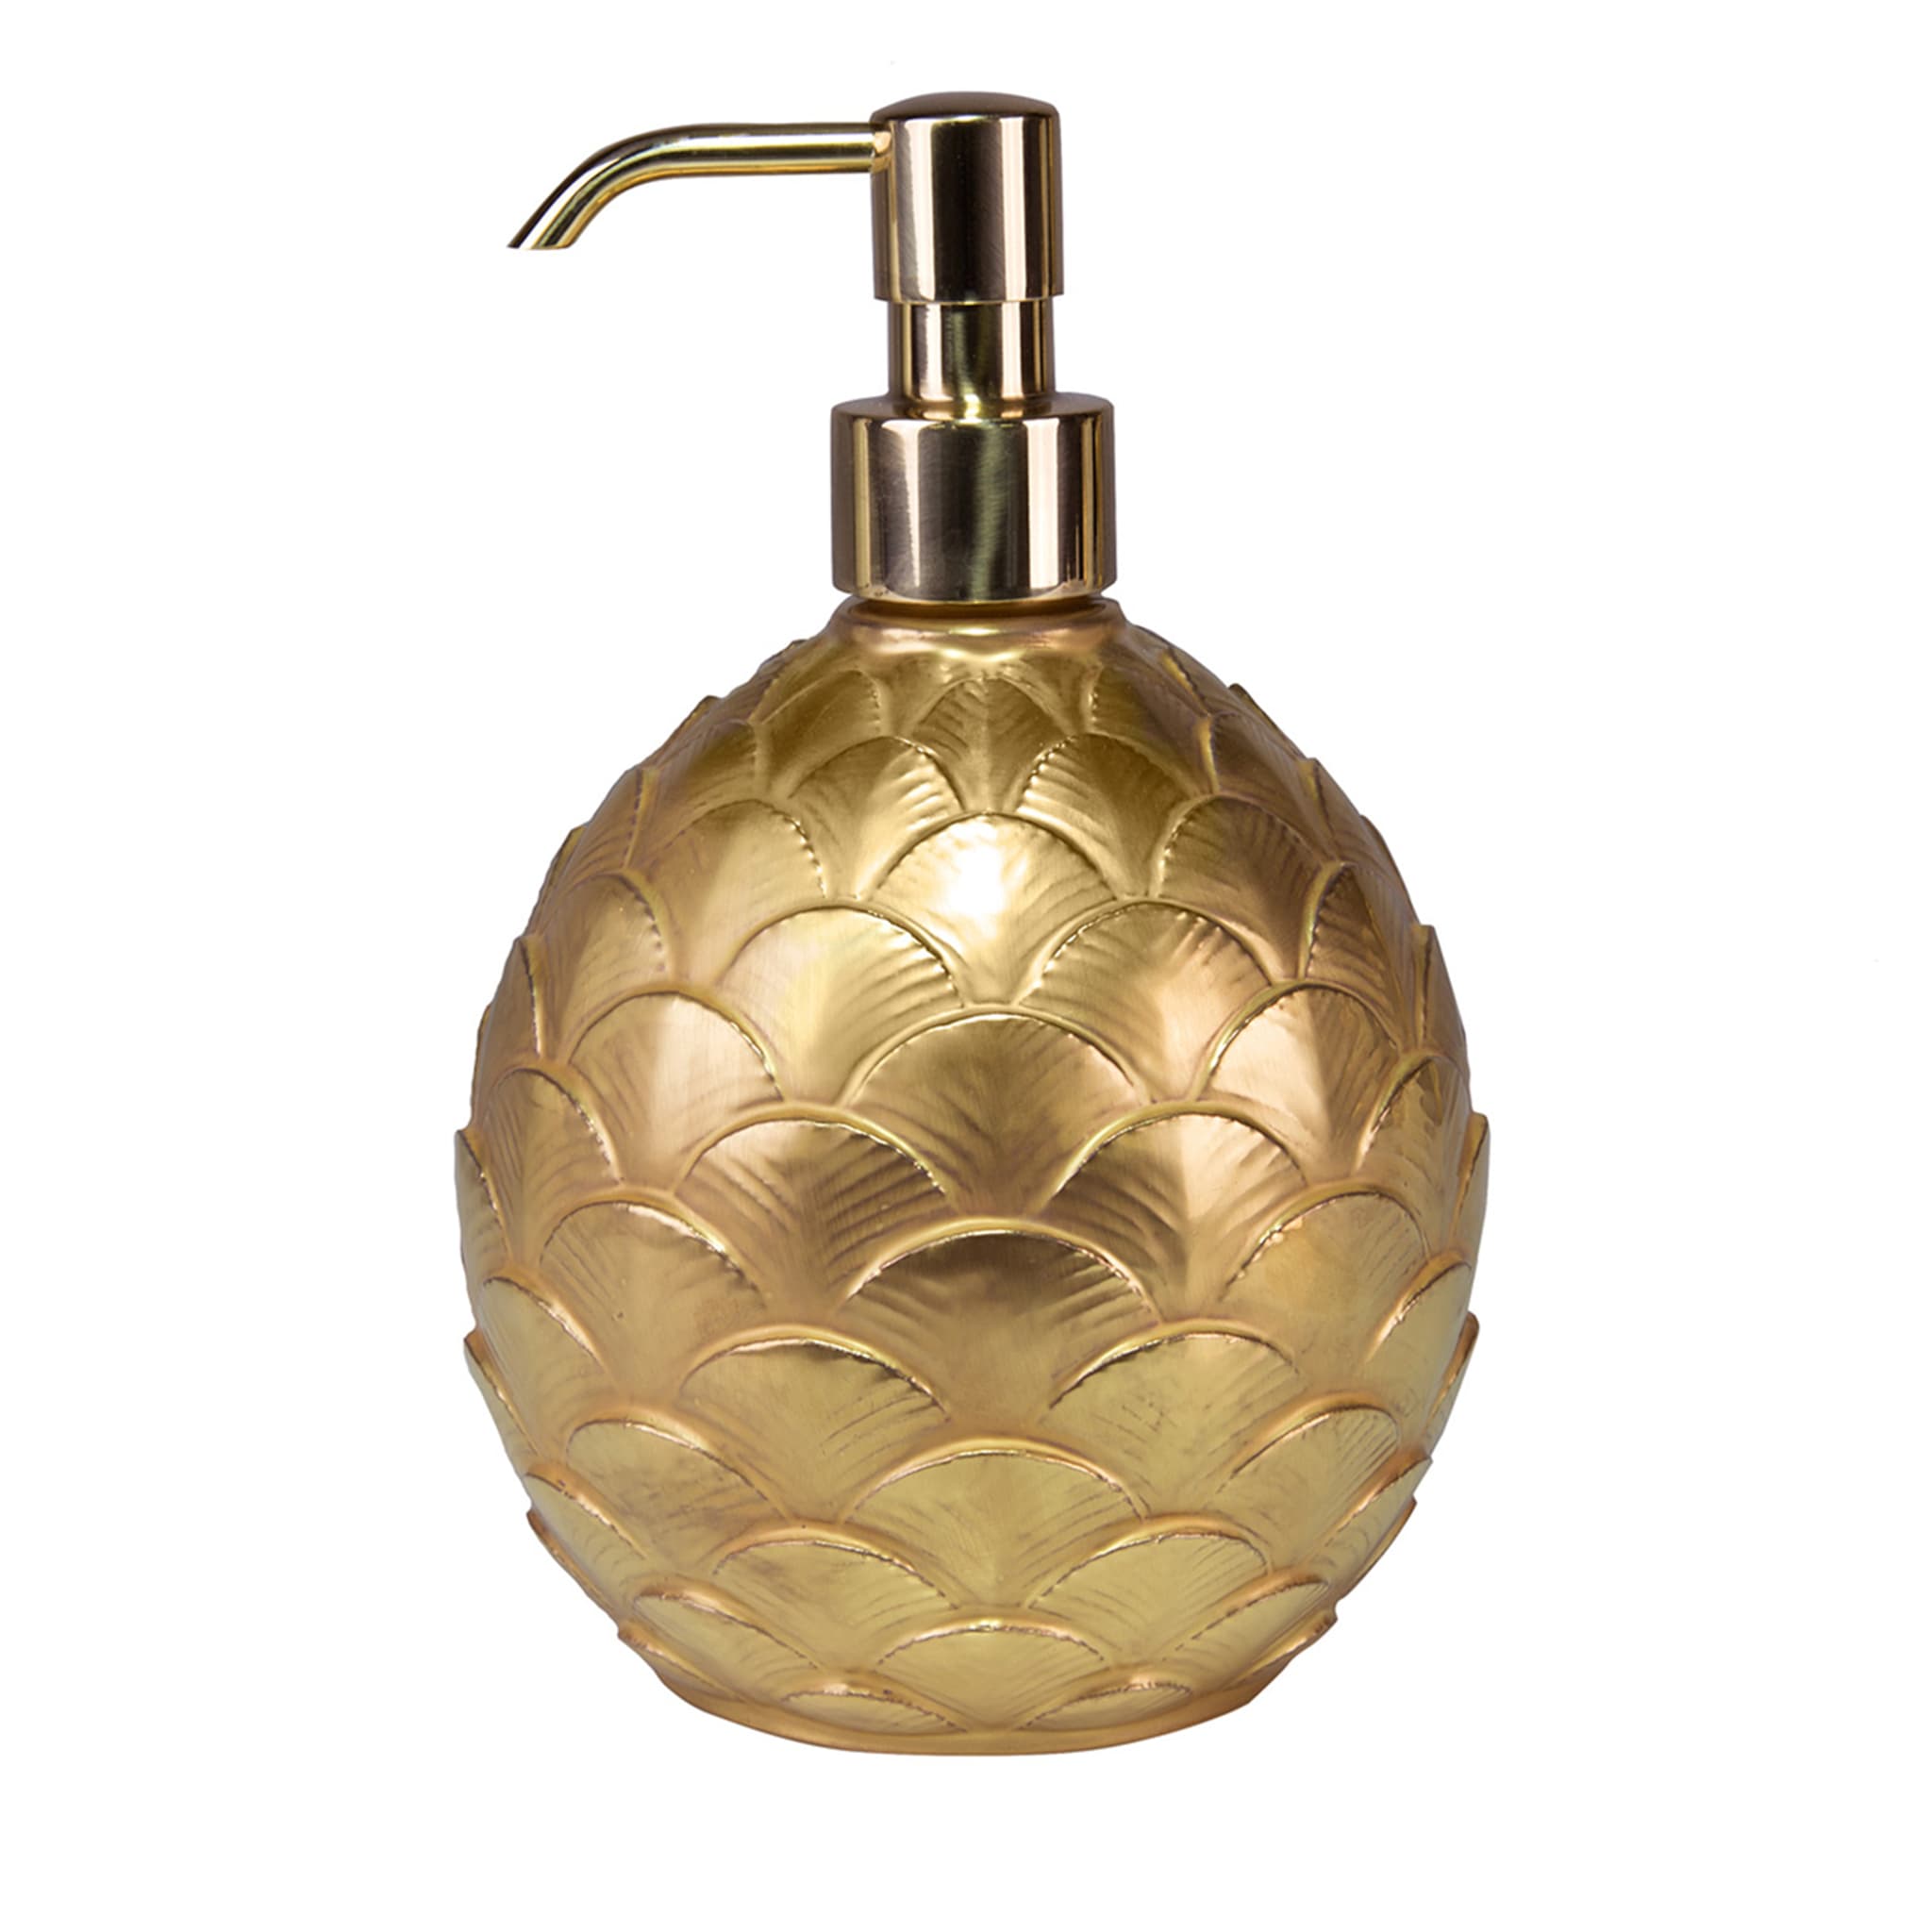 ROUND PEACOCK SOAP DISPENSER - GOLD - Main view